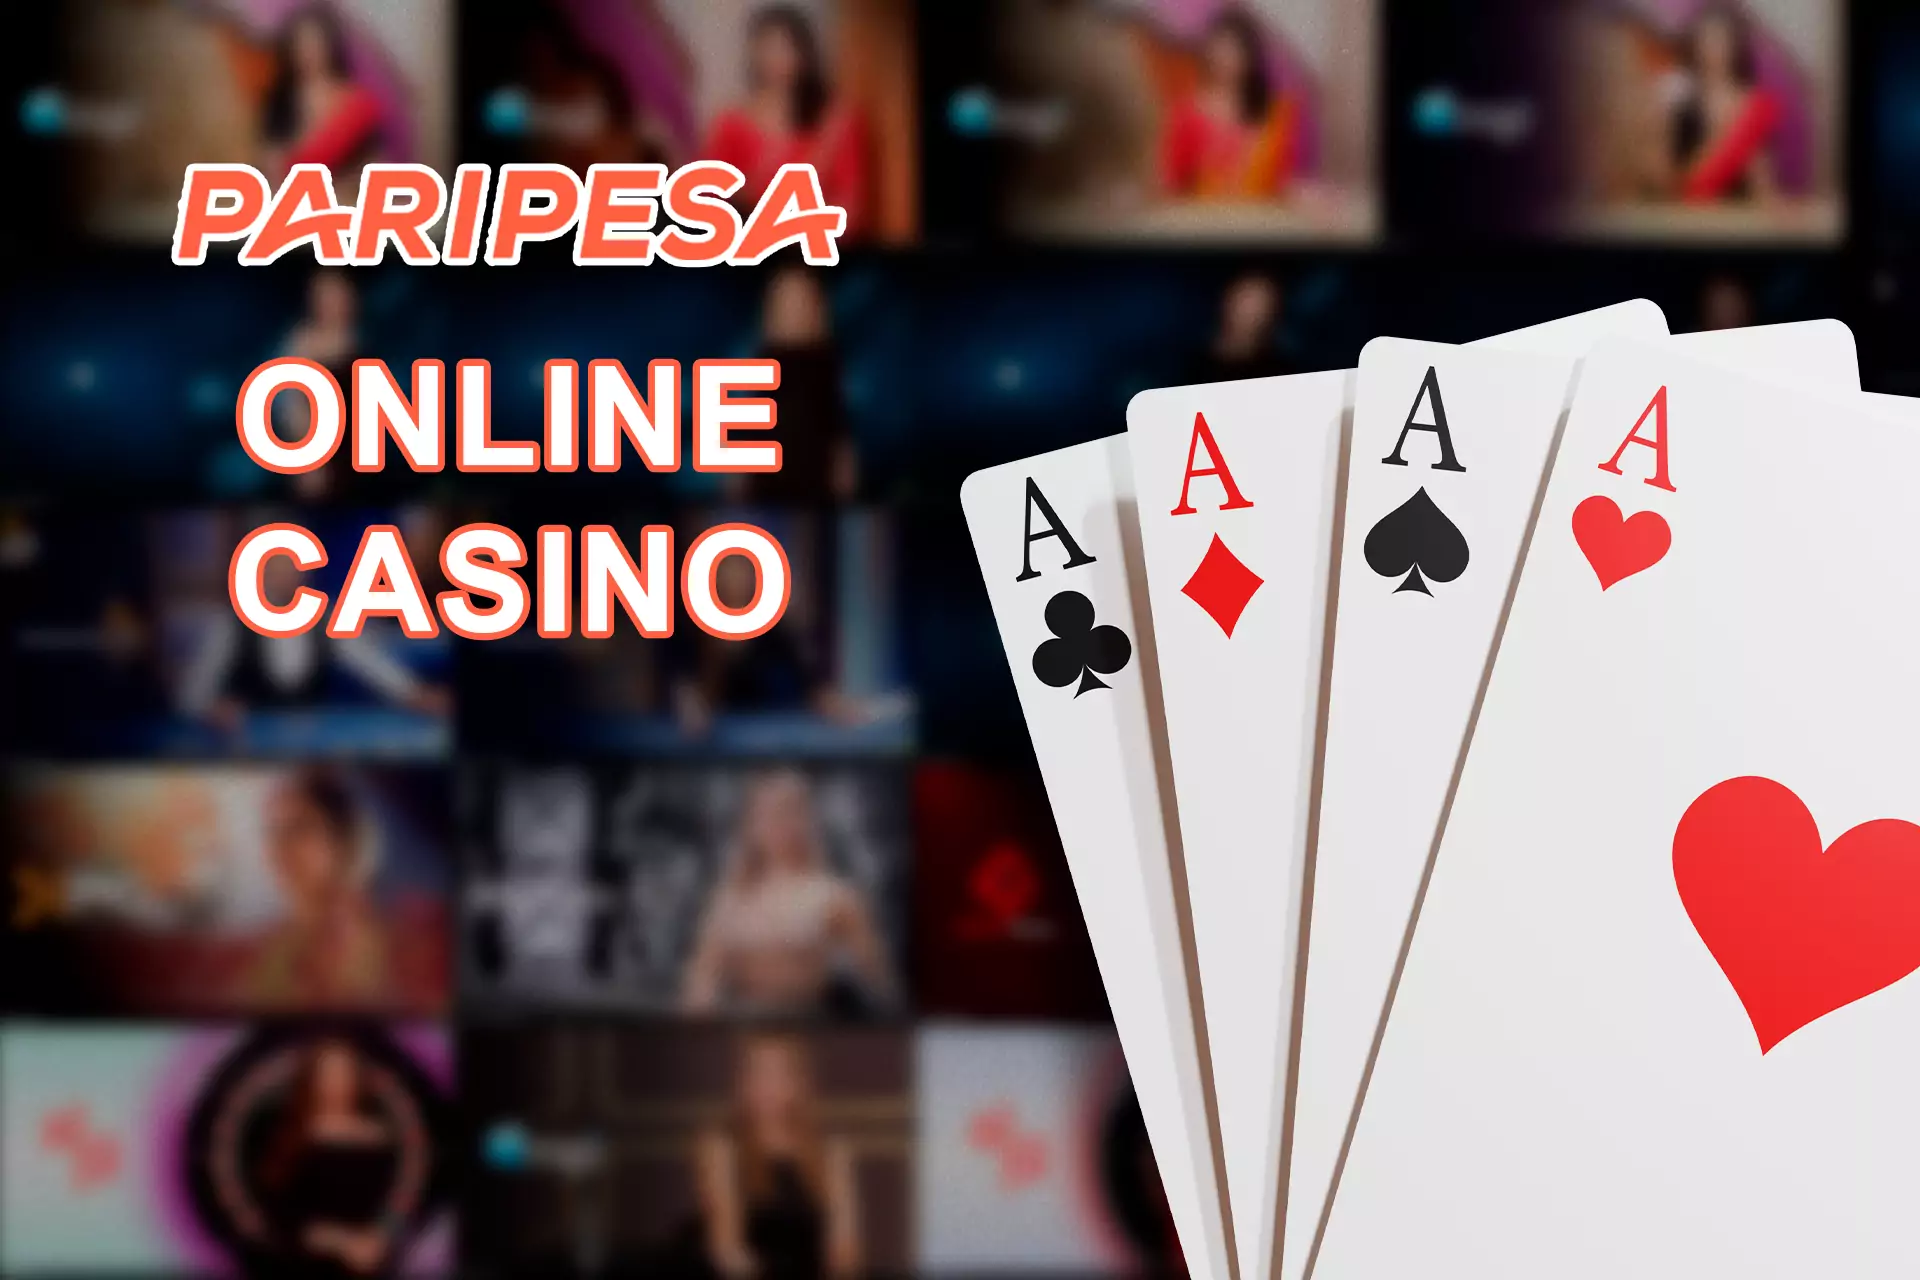 In the casino section, you can play slots and table games with live dealers.